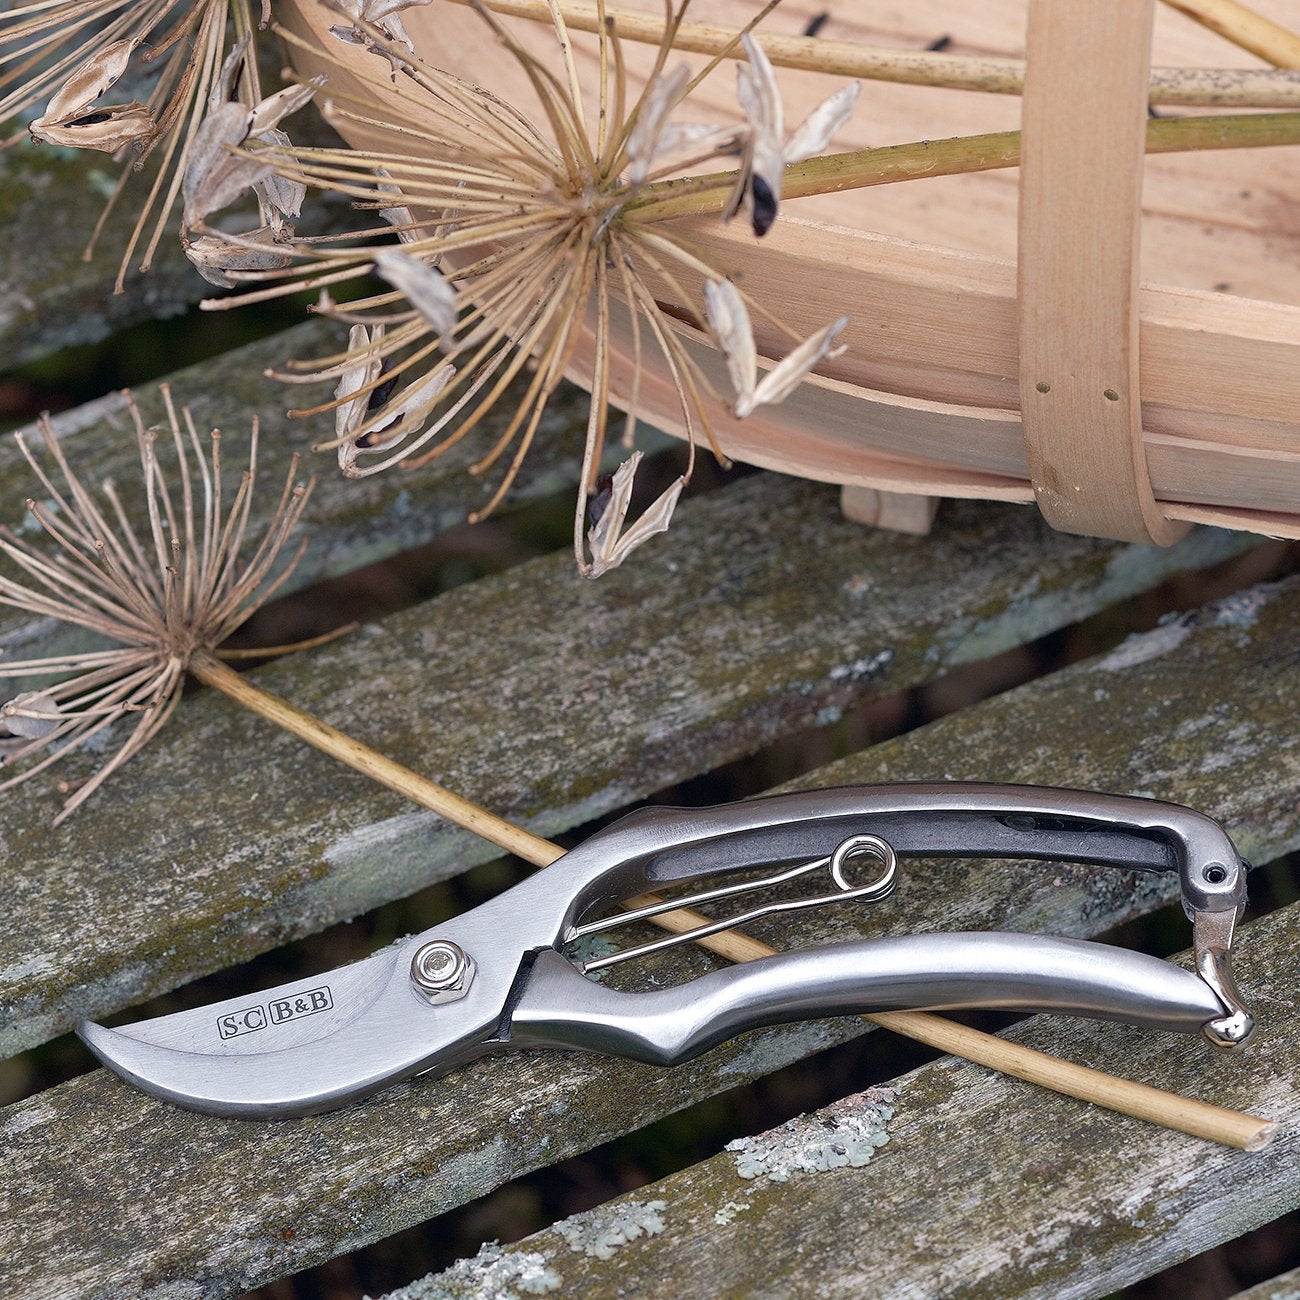 The handle, head and blade are crafted from a single piece of stainless steel, giving both strength and rust resistance. This garden pruner easily cuts growth up to 2cm in diameter, with a bypass action for making clean, healthy cuts on green growth.